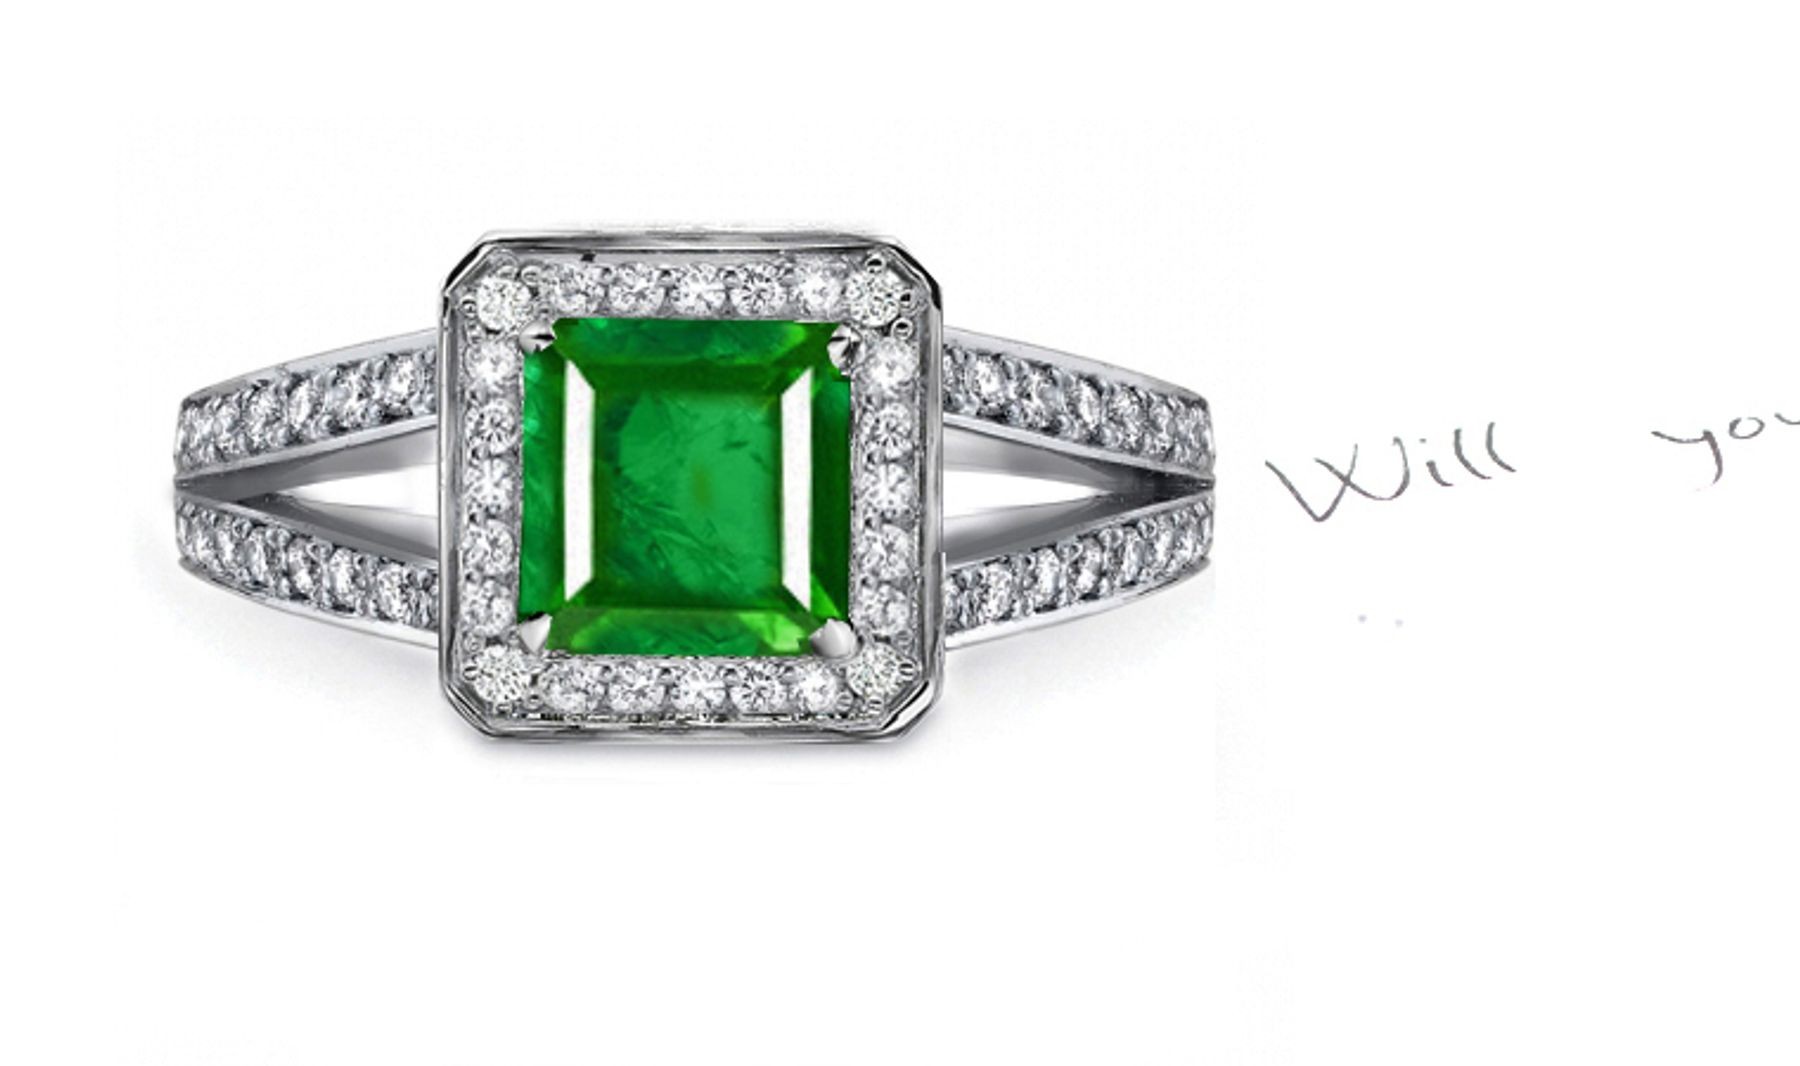 Large and Varied Collection: 18k This Simple Princess Cut Emerald & Diamond Halo Chevron Gleaming 18k Gold Ring